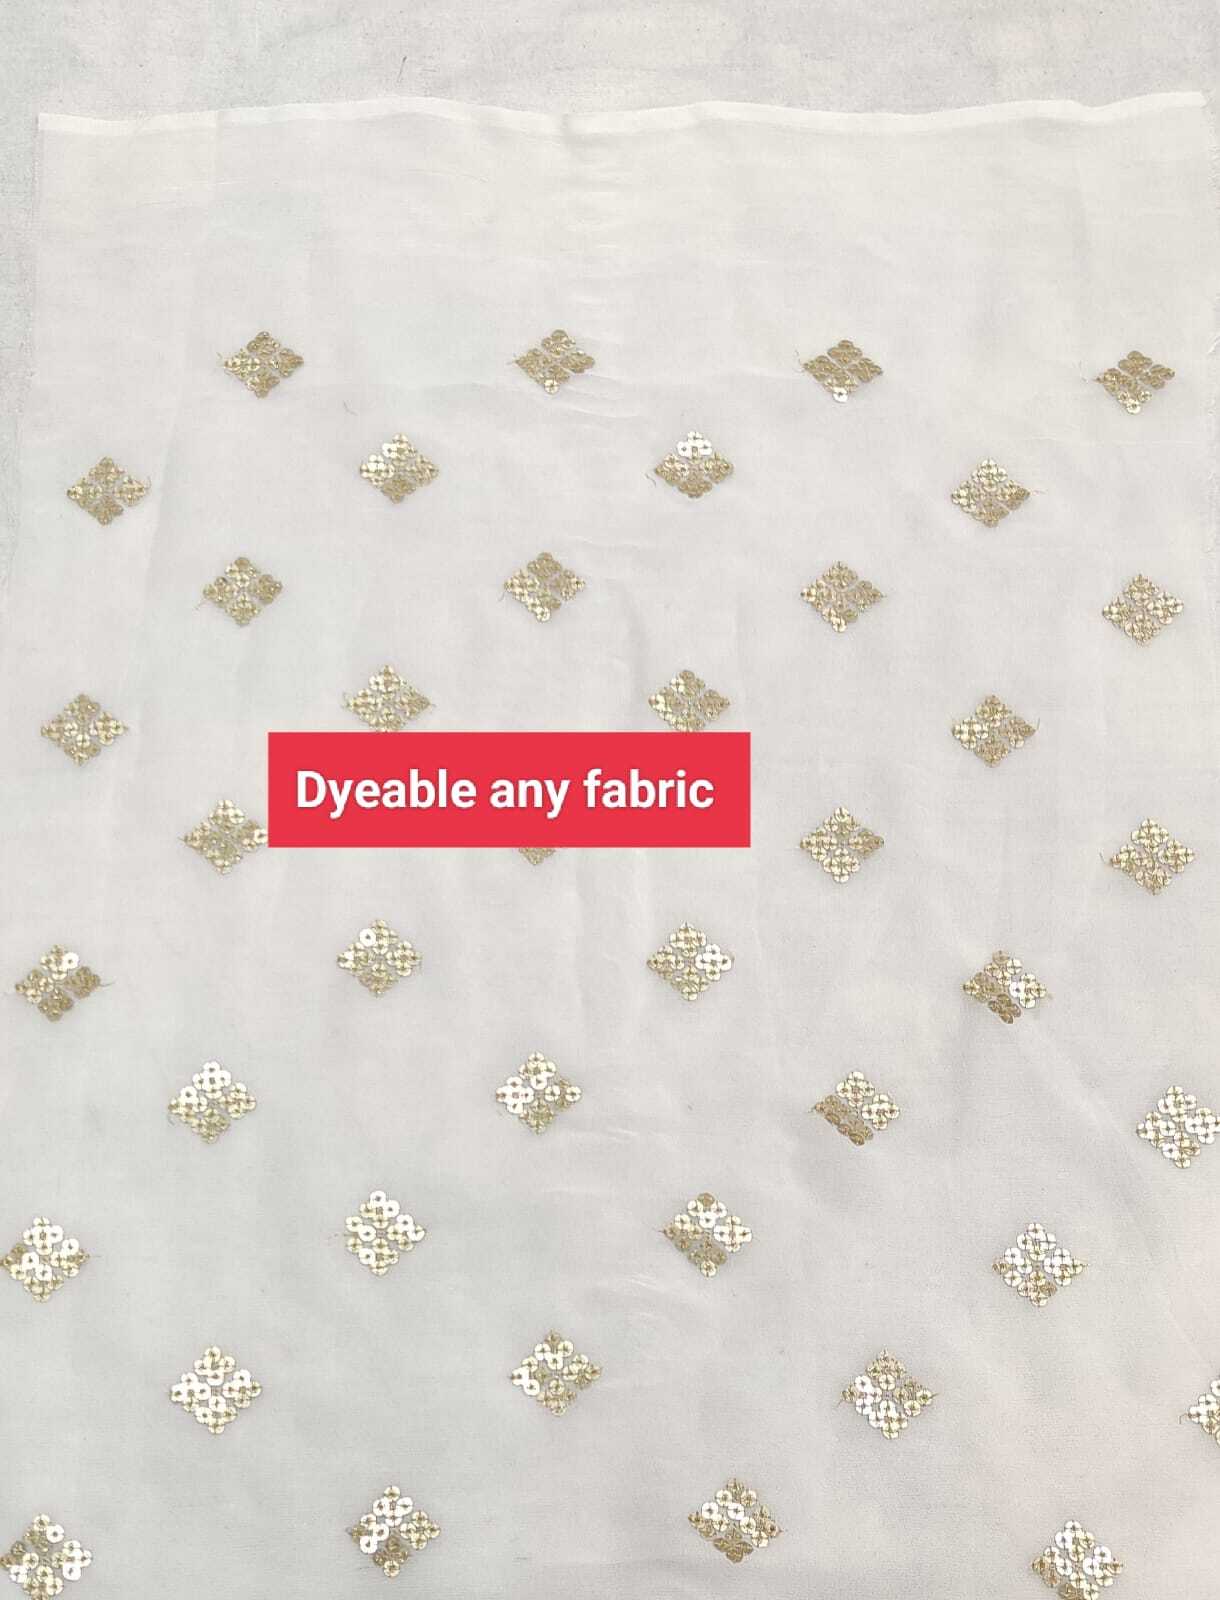 DYEABLE ANY FABRIC